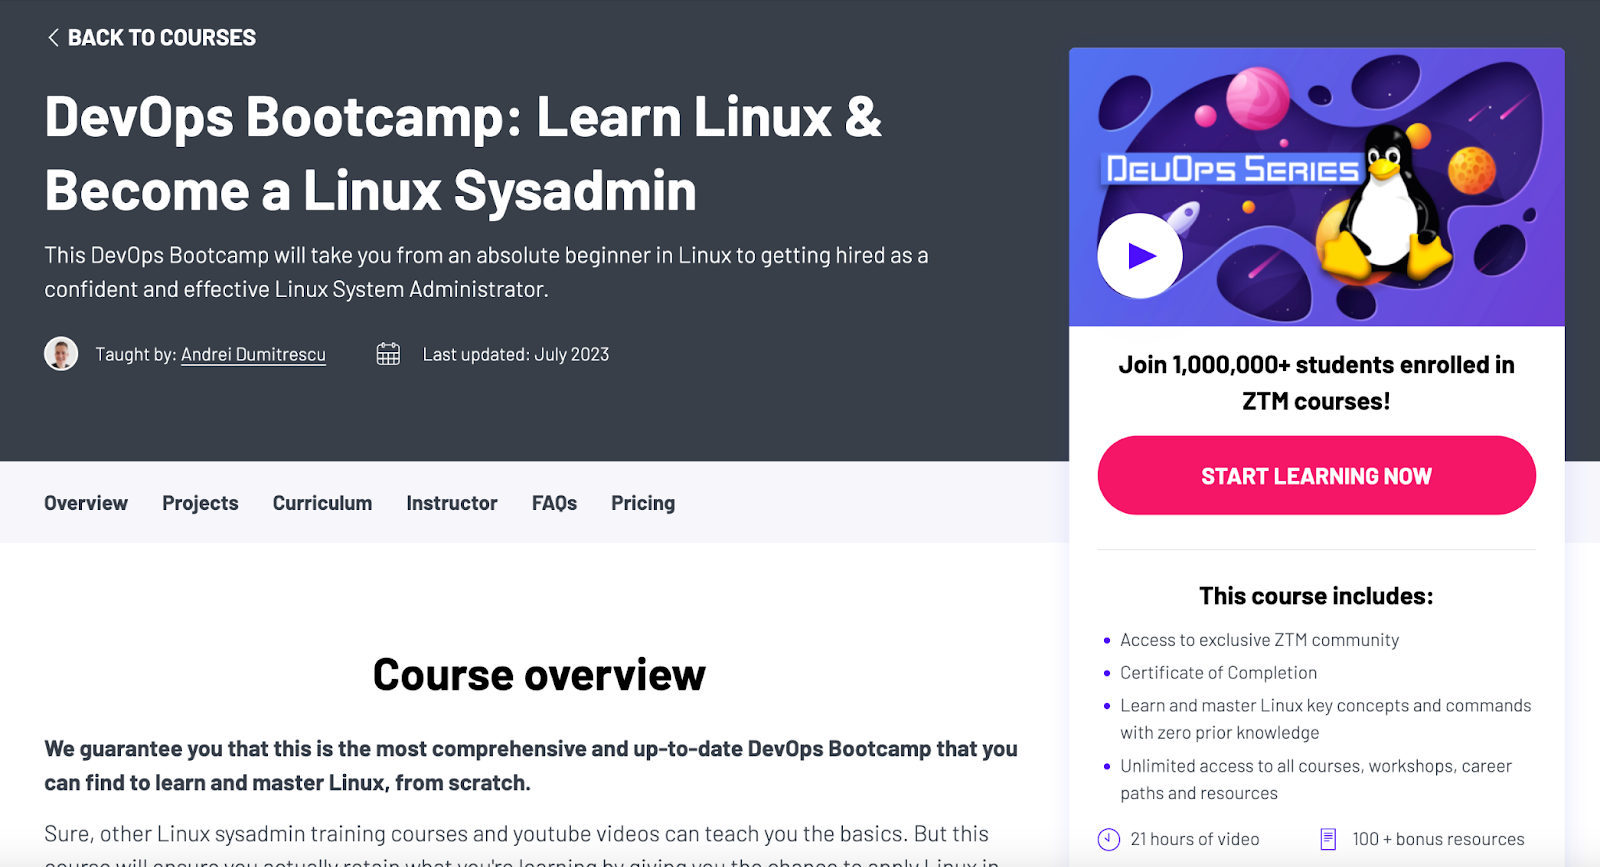 DevOps Bootcamp: Learn Linux & Become a Linux Sysadmin